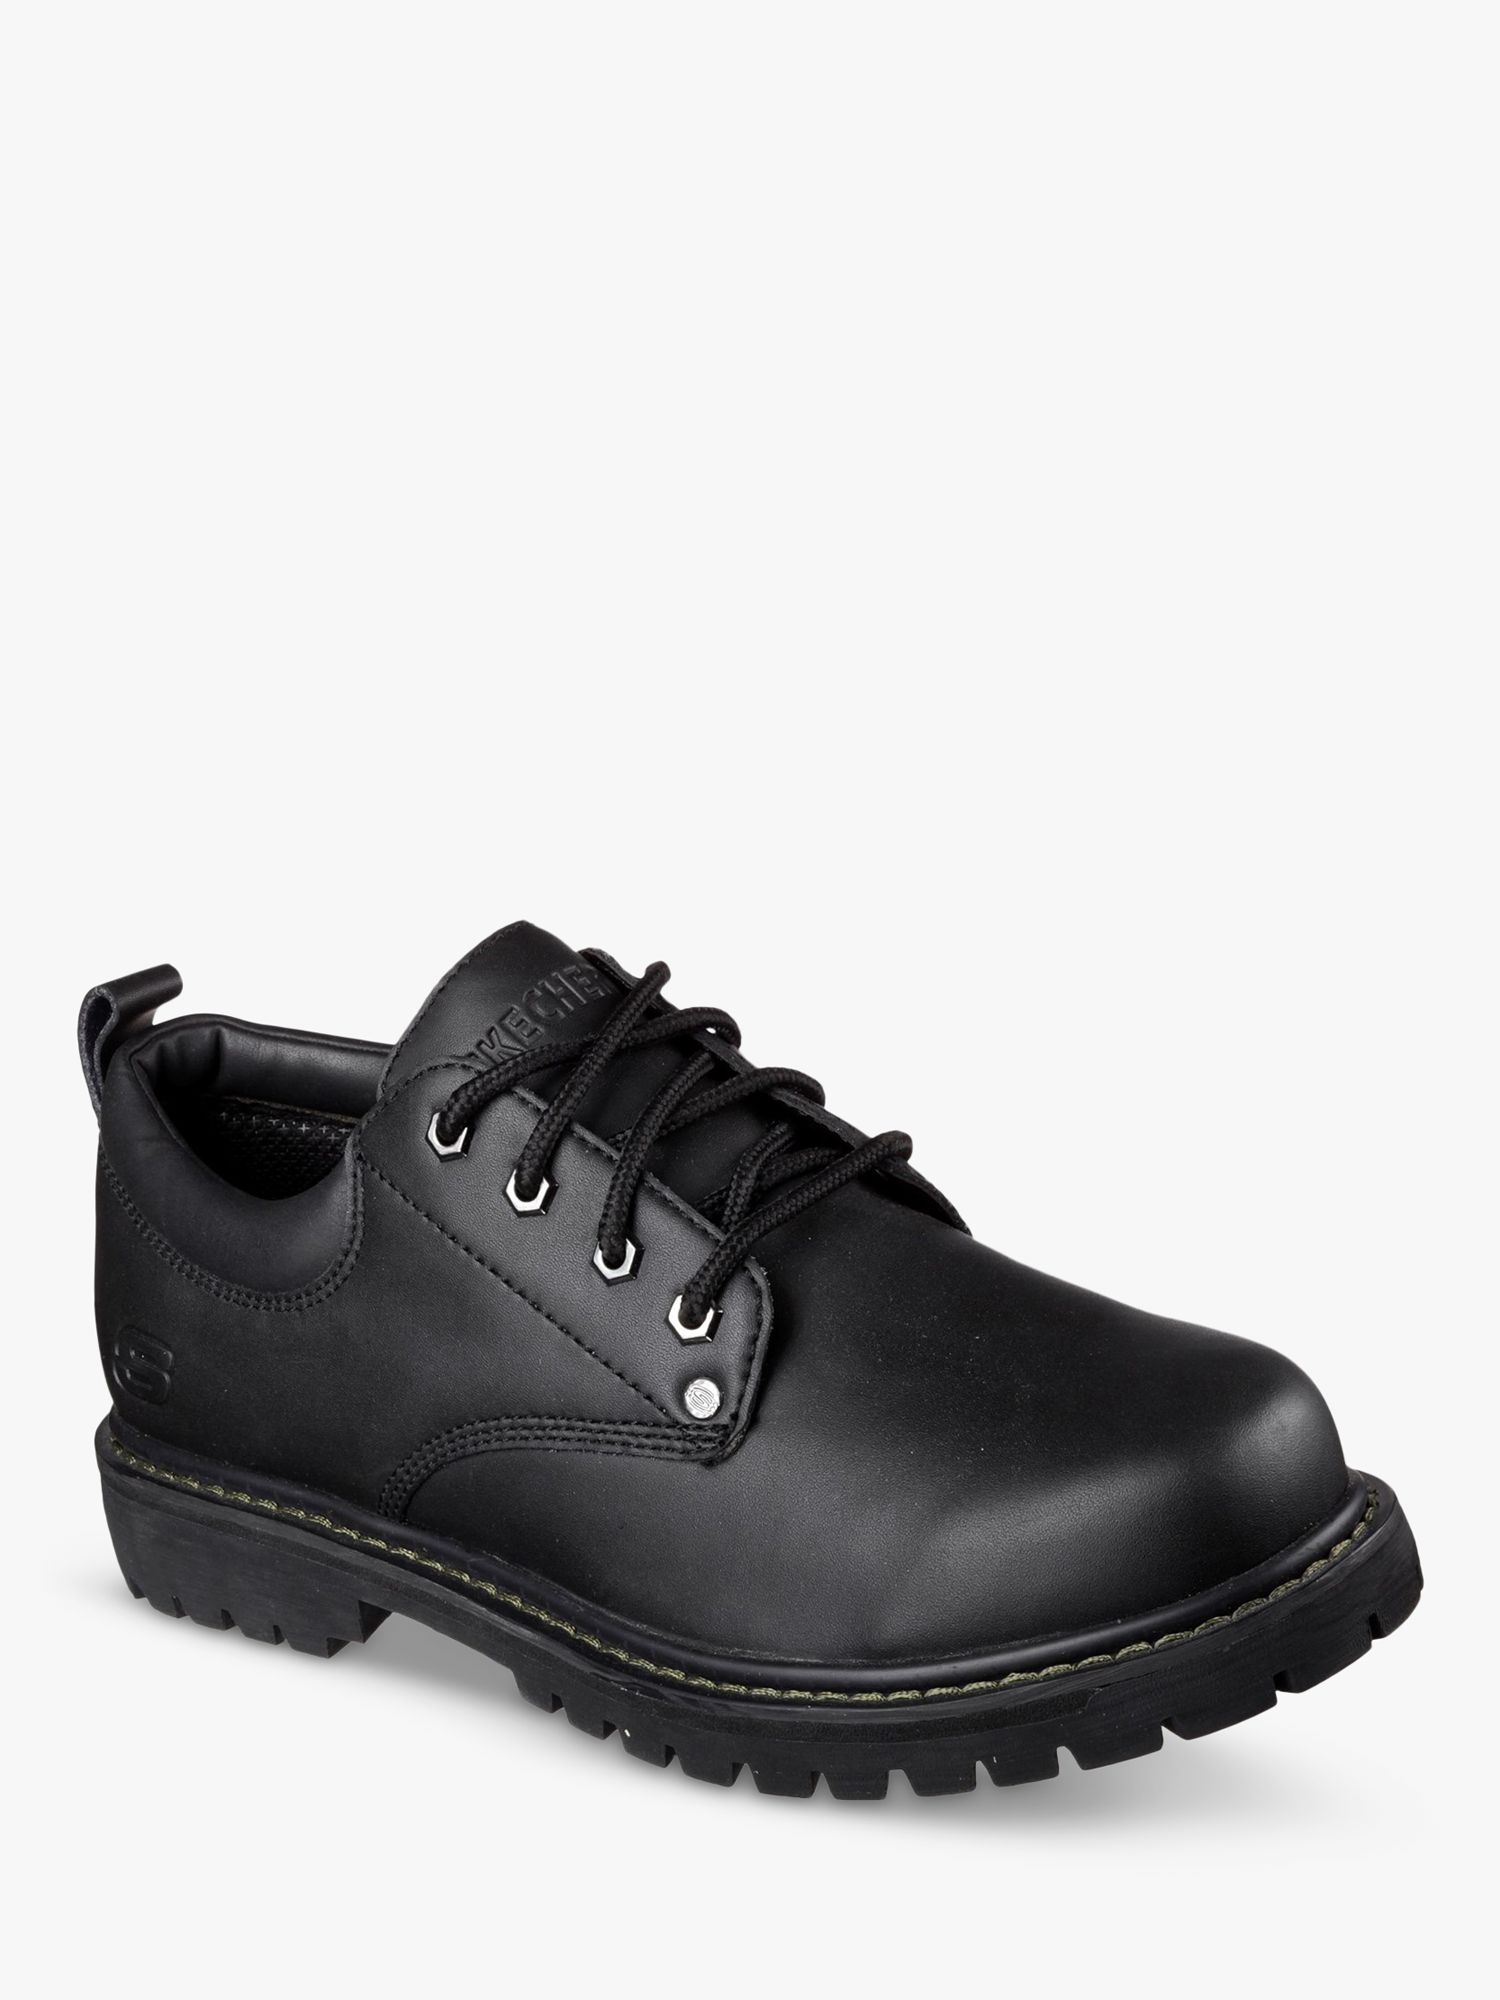 Skechers Tom Cats Leather Lace Up Oxford Shoes, Black, 8